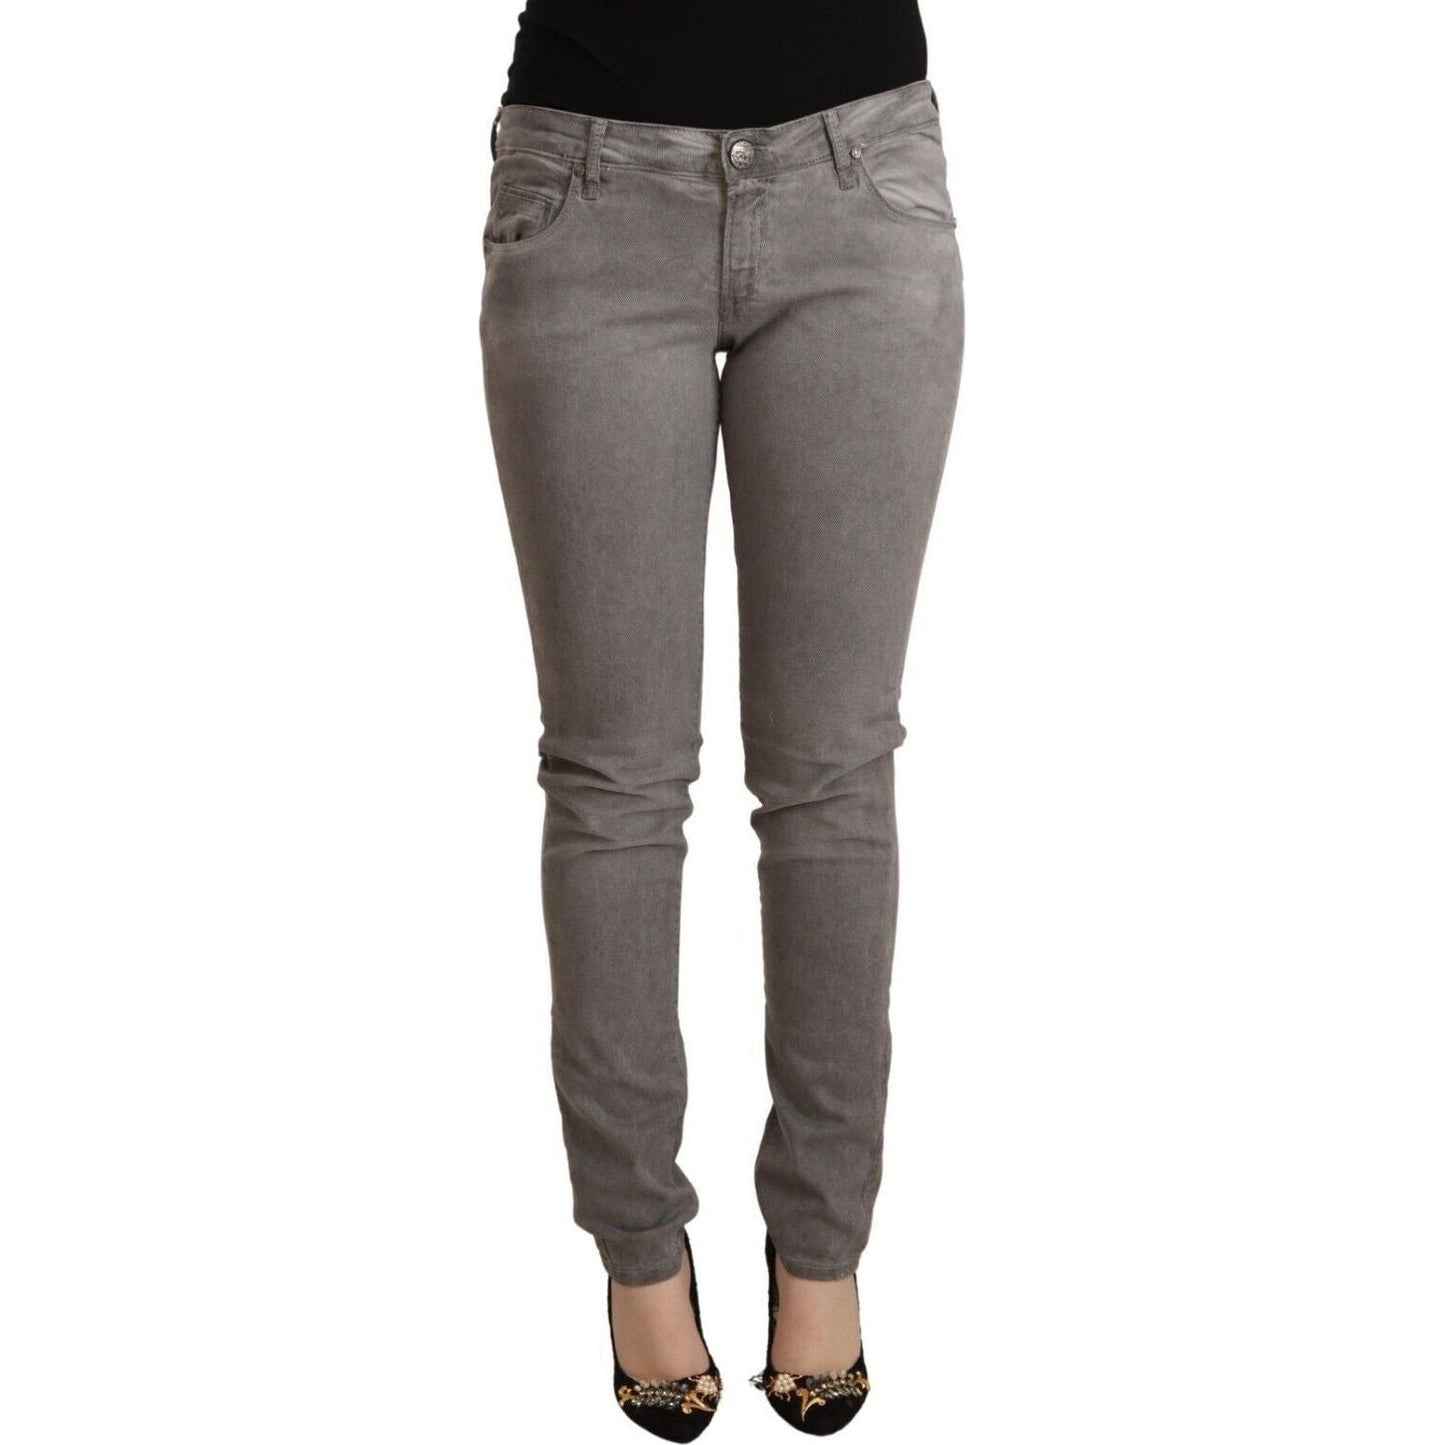 Acht Chic Low Waist Skinny Cotton Blend Jeans gray-cotton-low-waist-skinny-push-up-denim-jeans